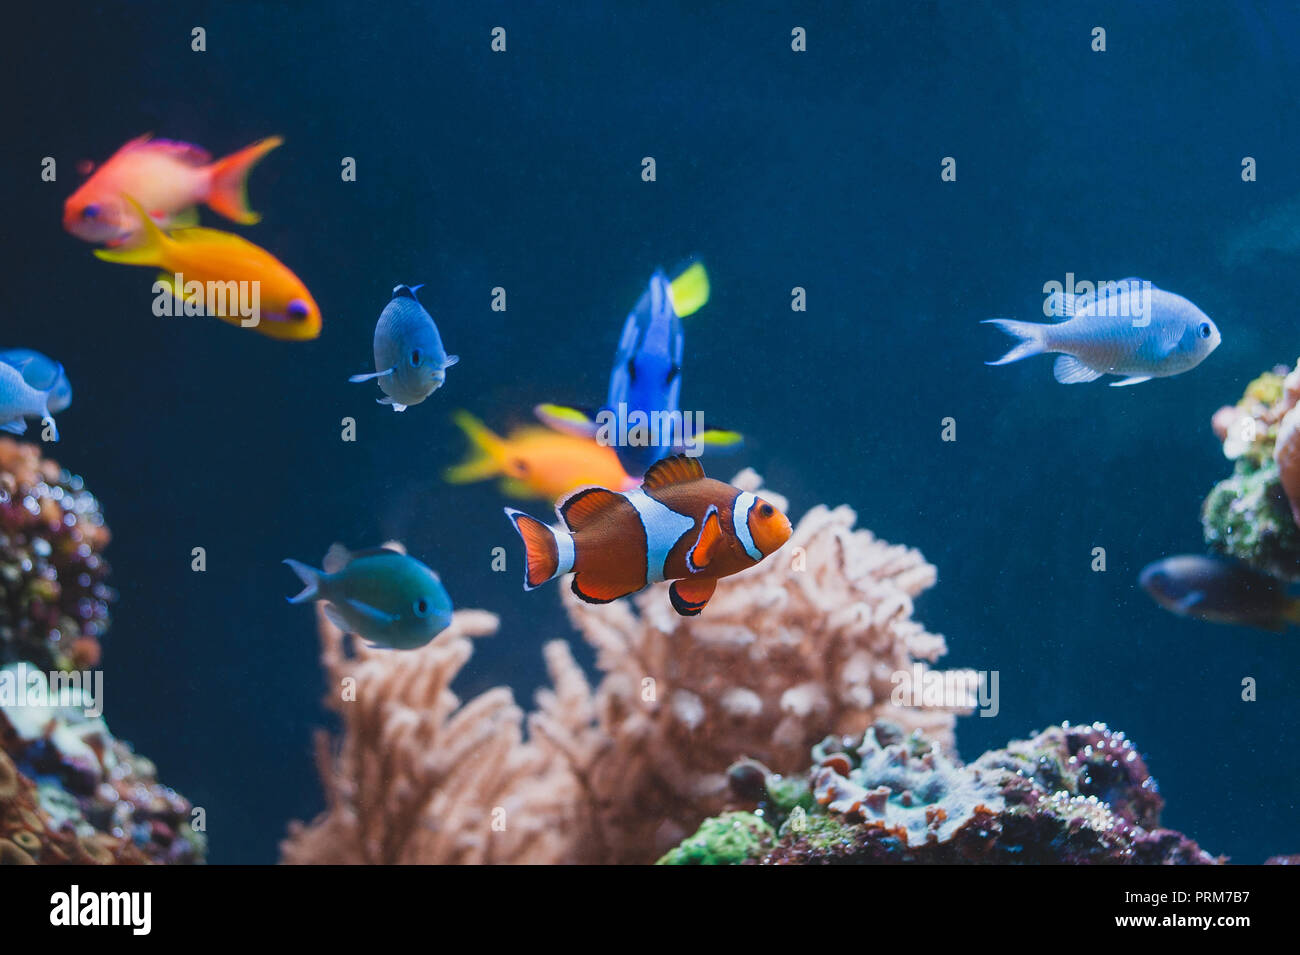 Aquarium colourfull different fishes in deep blue water Stock Photo